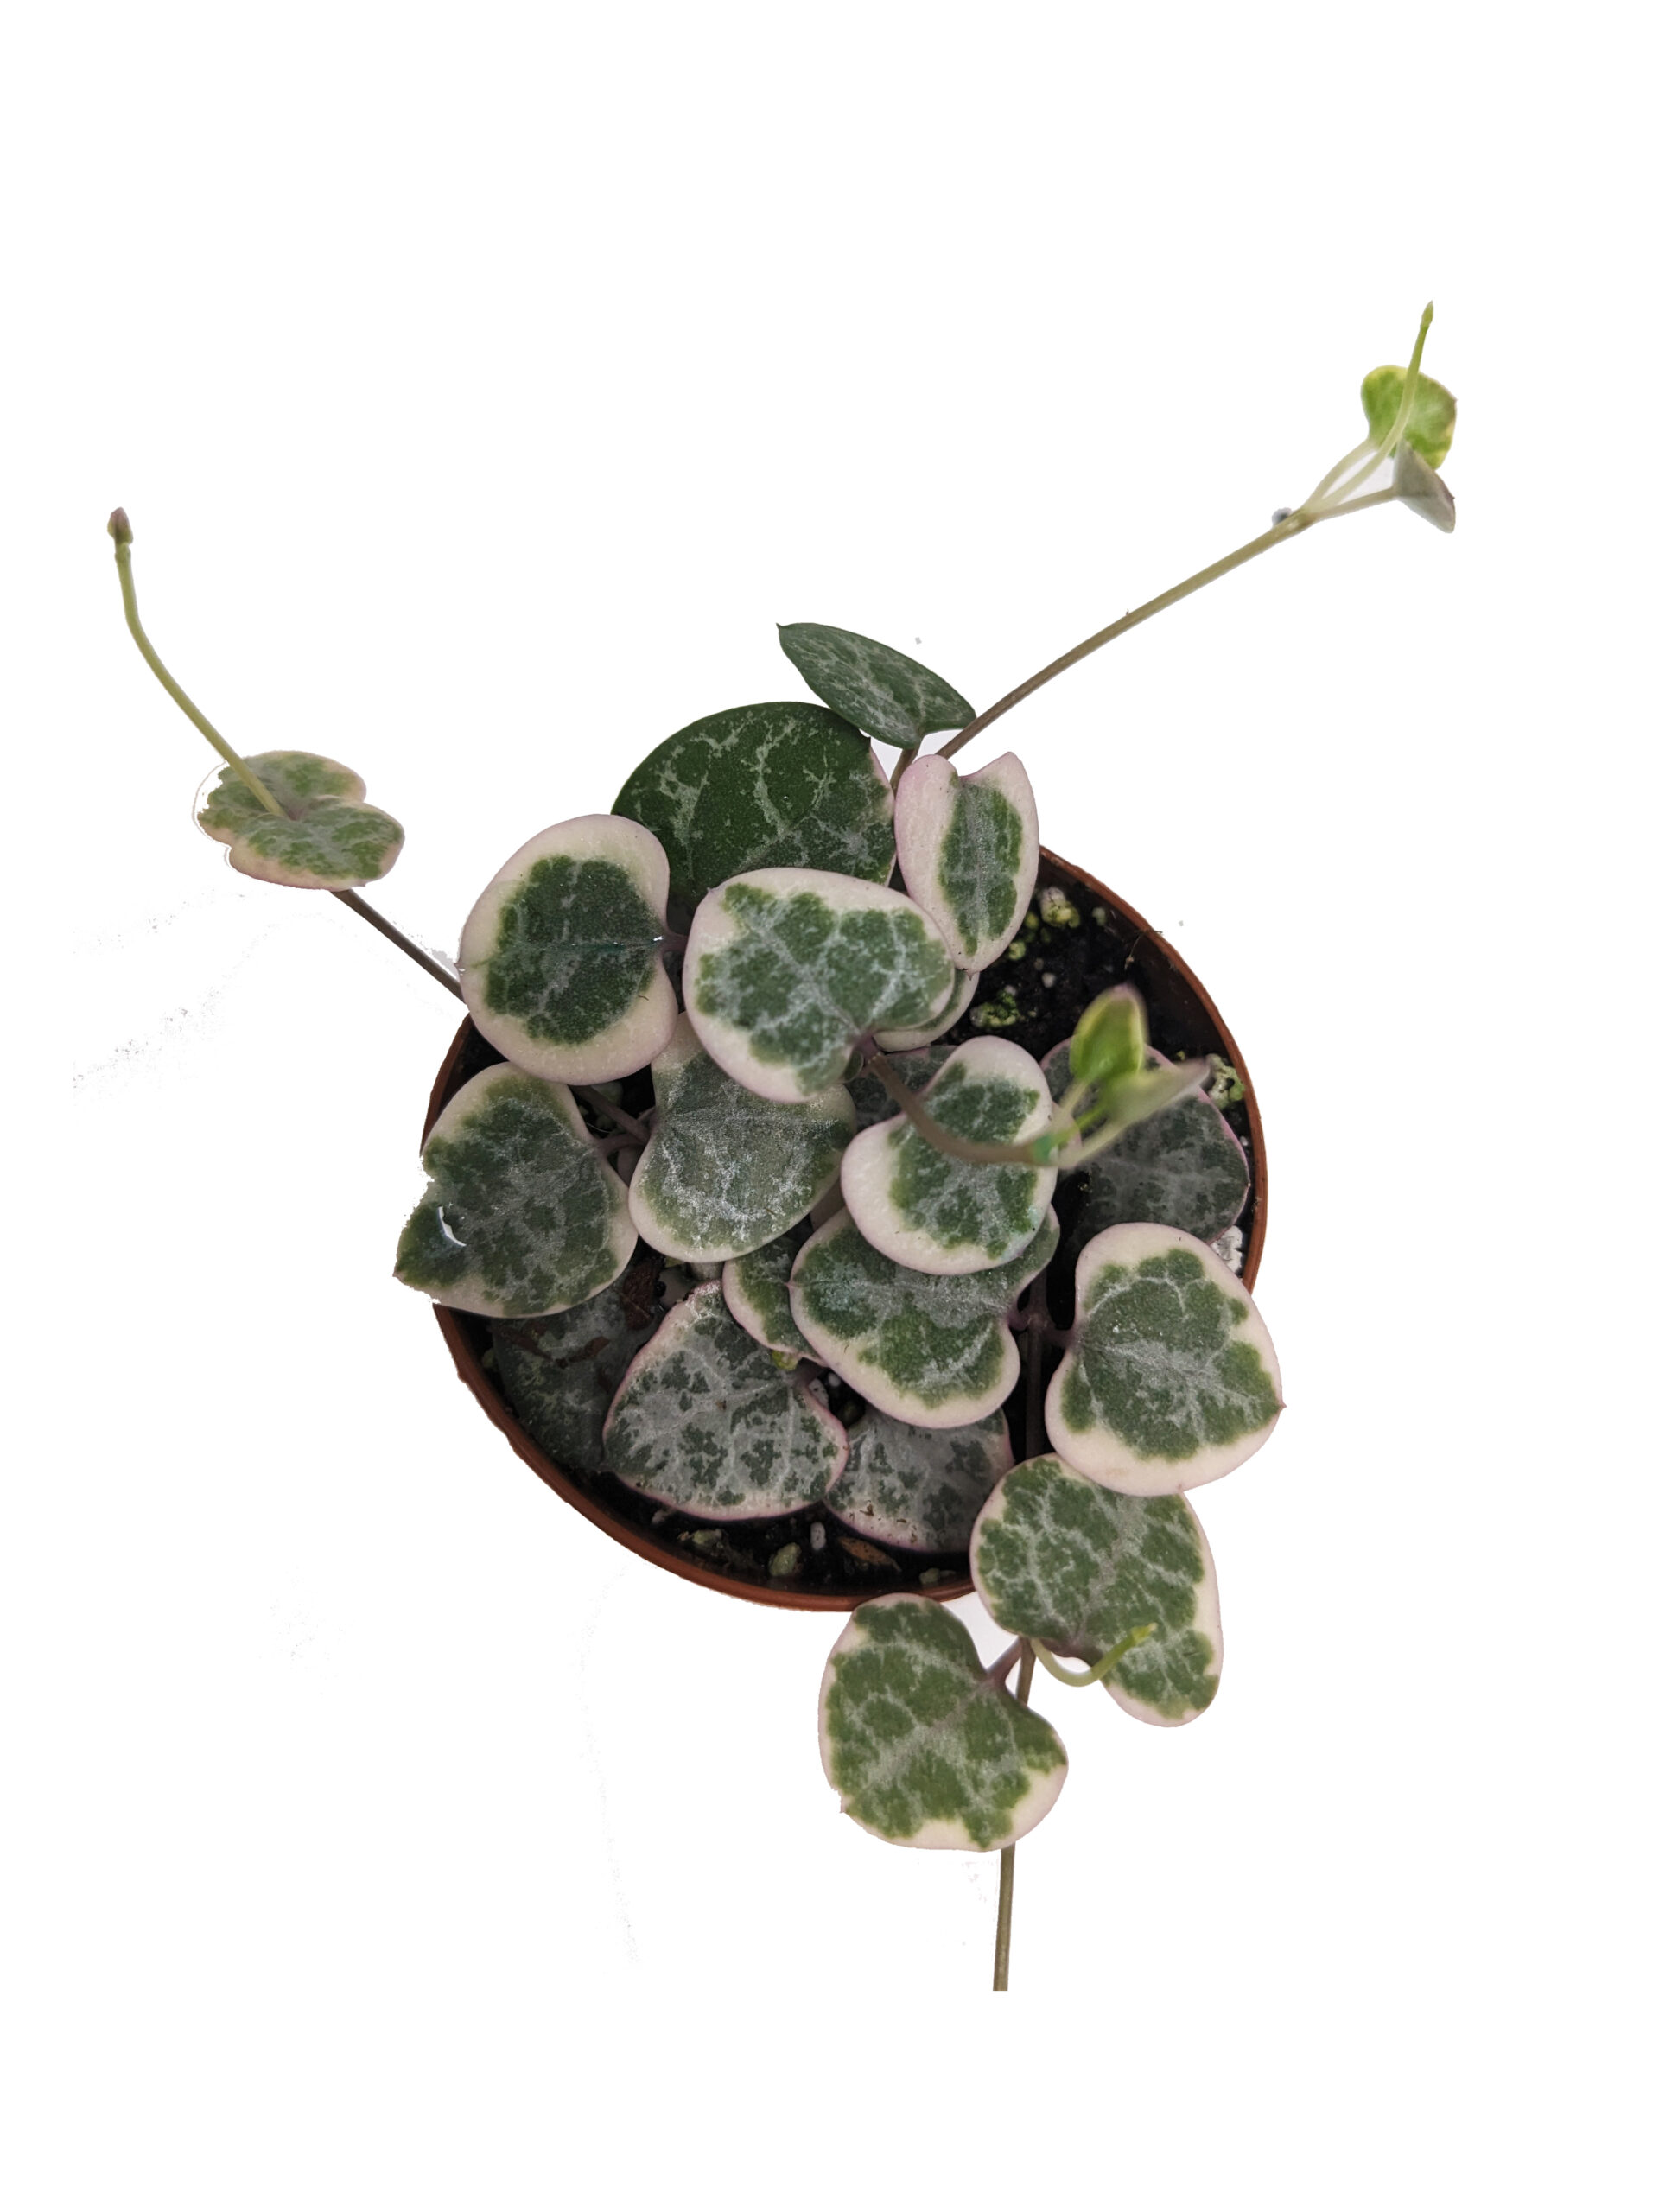 ceropegia woodii "string of hearts" variegated